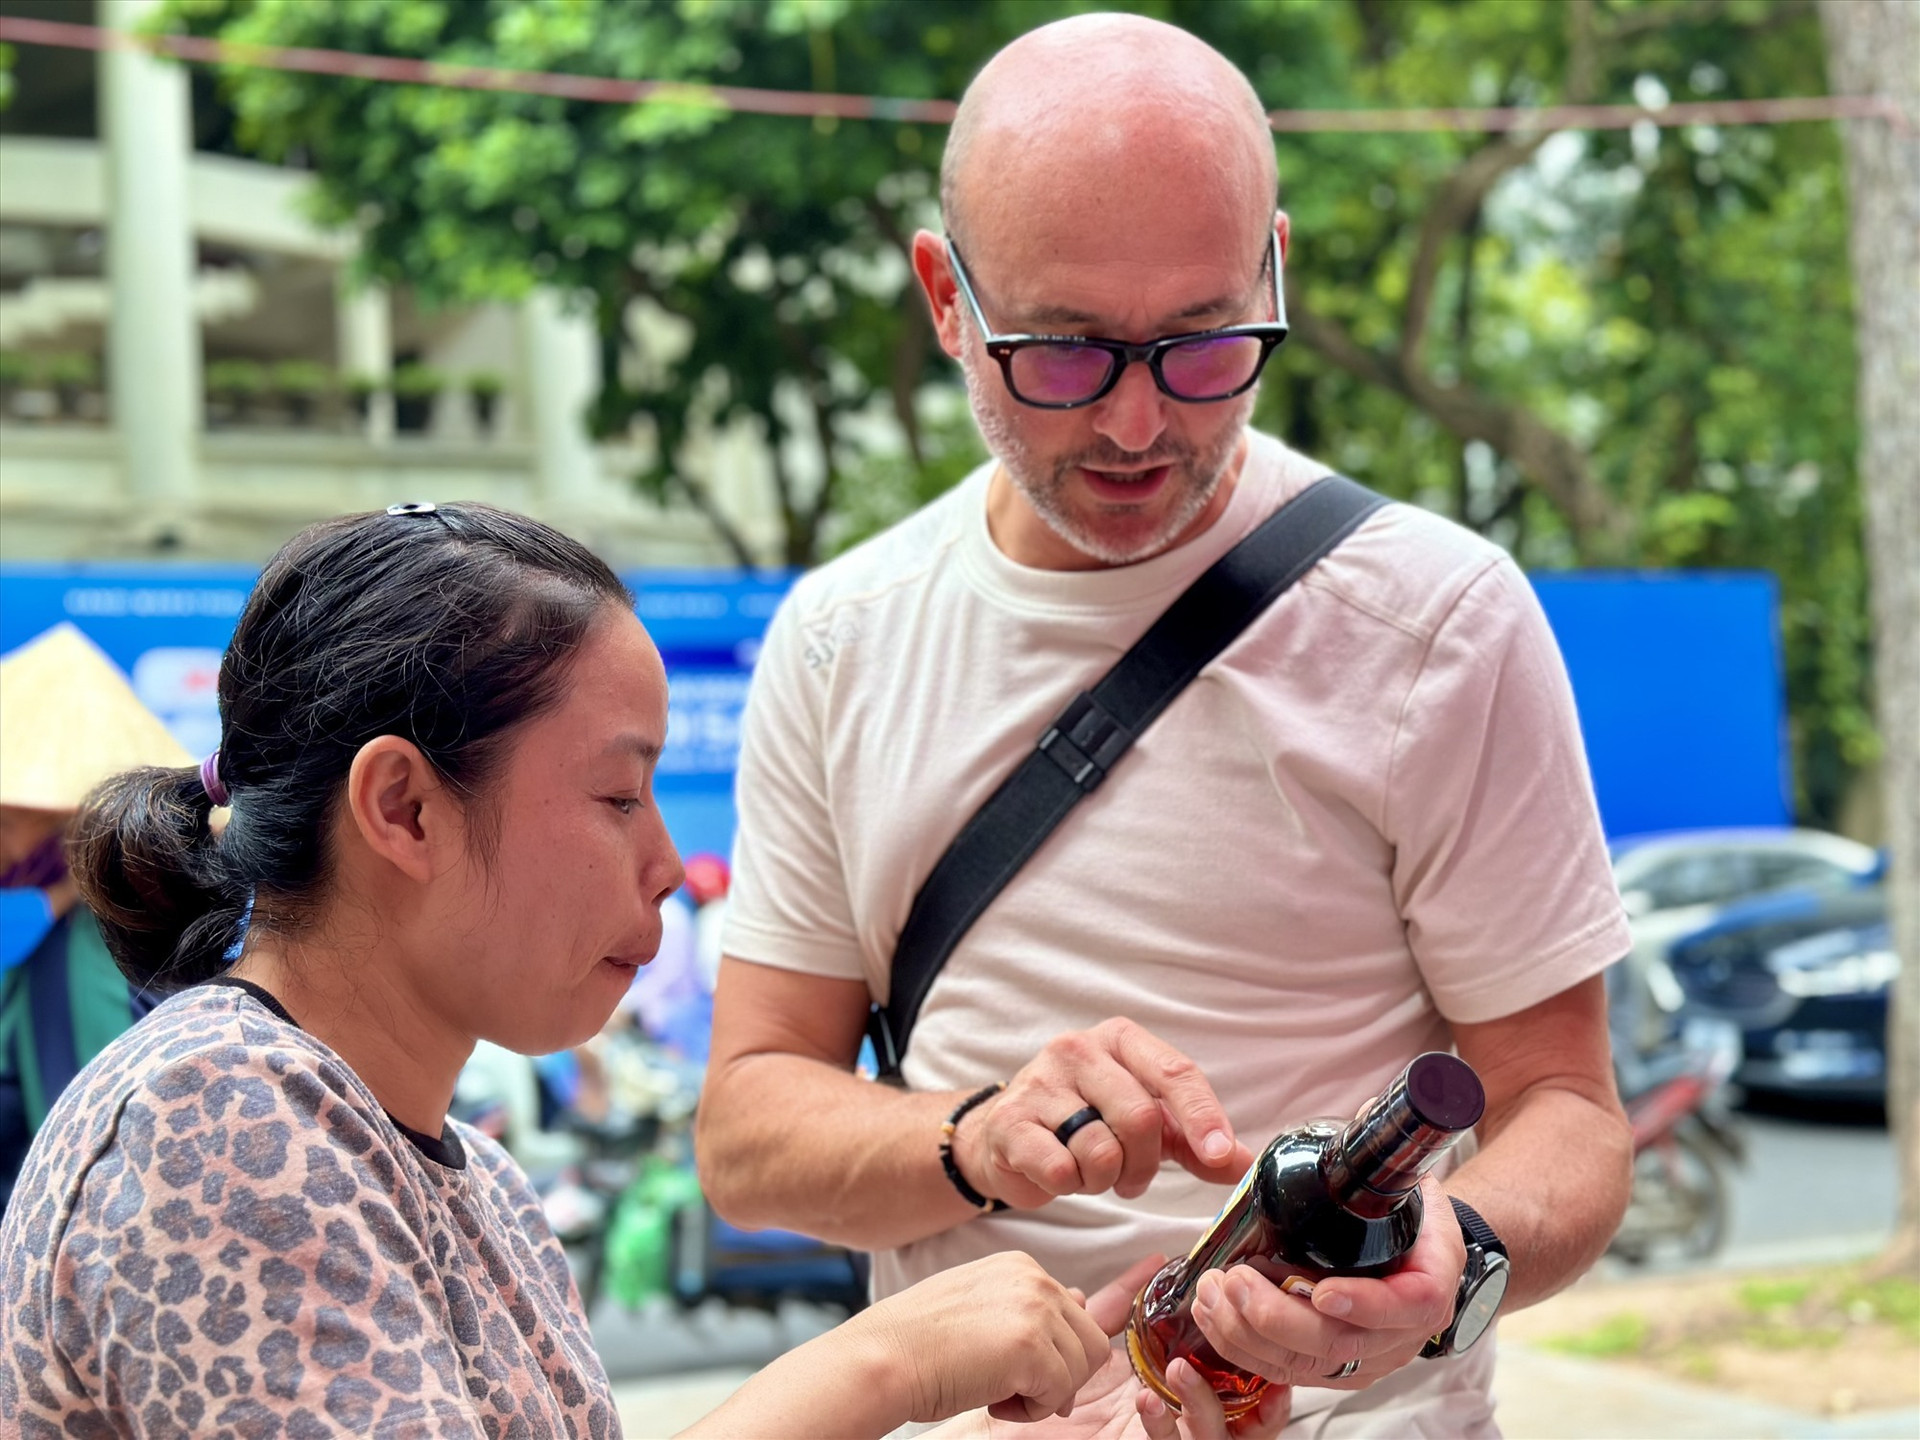 Introducing Quang Nam products to a foreigner